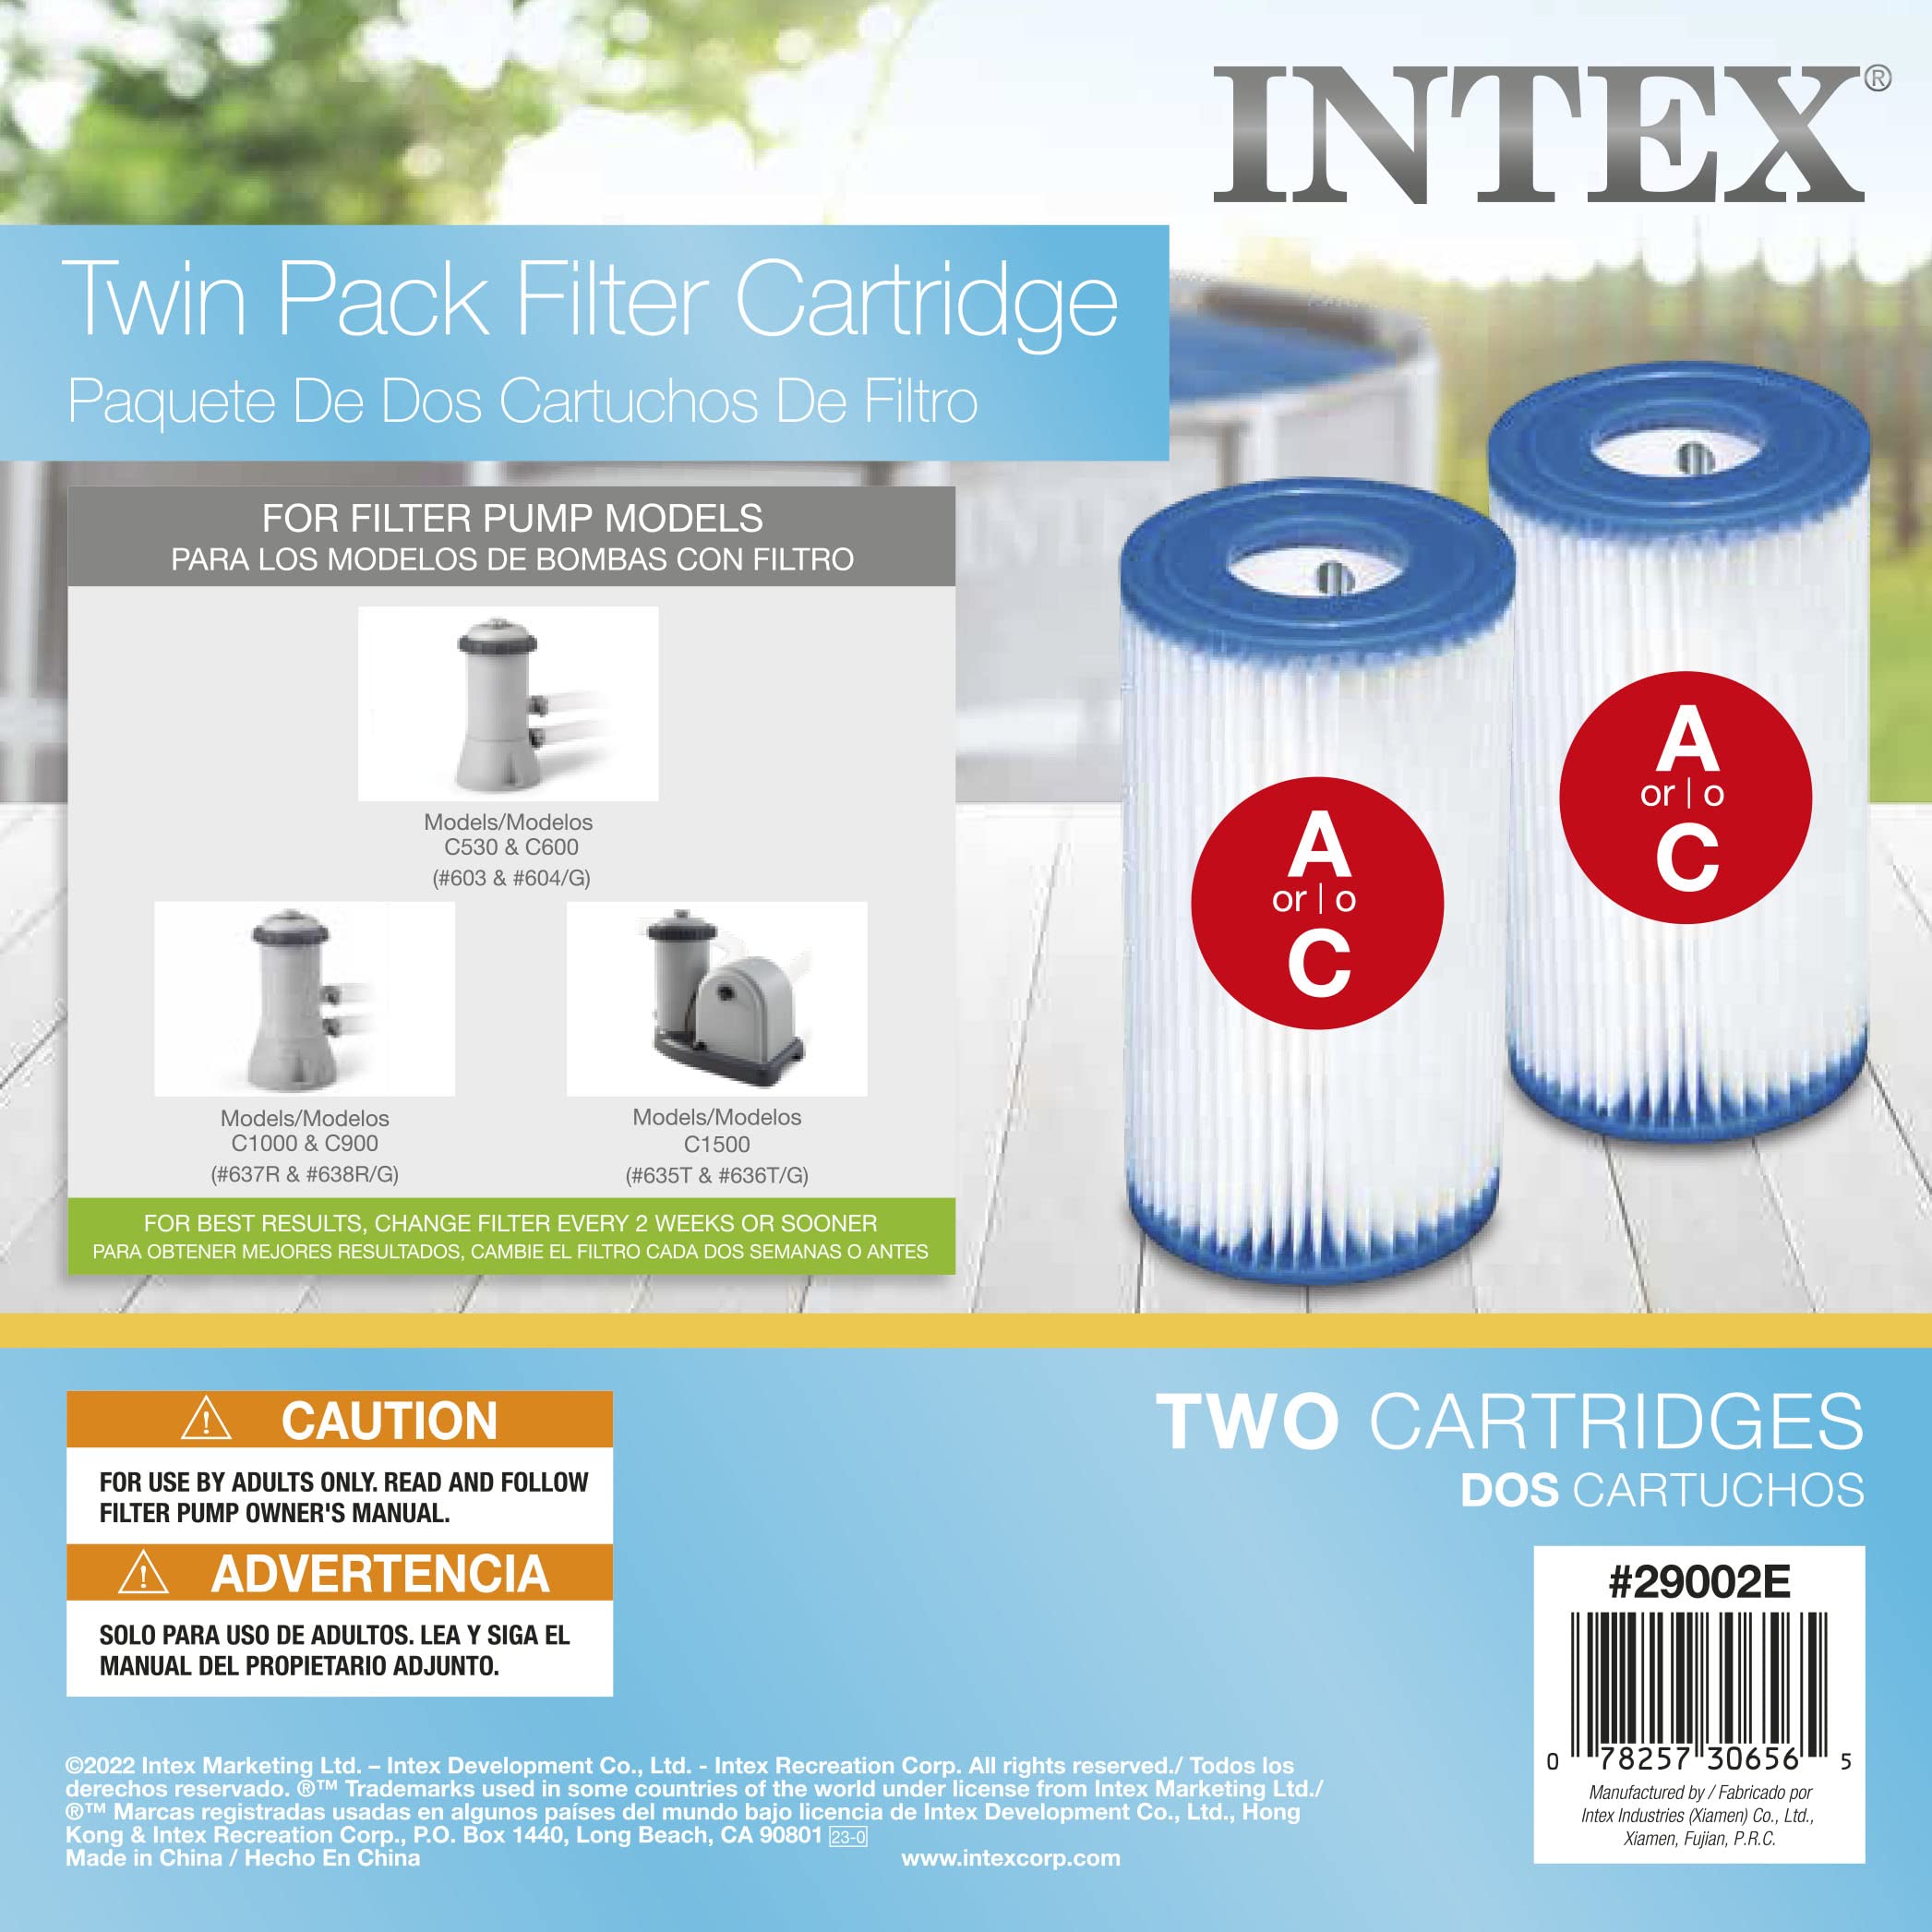 INTEX 29002E Type A Pool Filter Cartridge: For INTEX Filter Pumps – Easy-To-Clean – Dacron Paper – Efficient Filtration – Two Pack